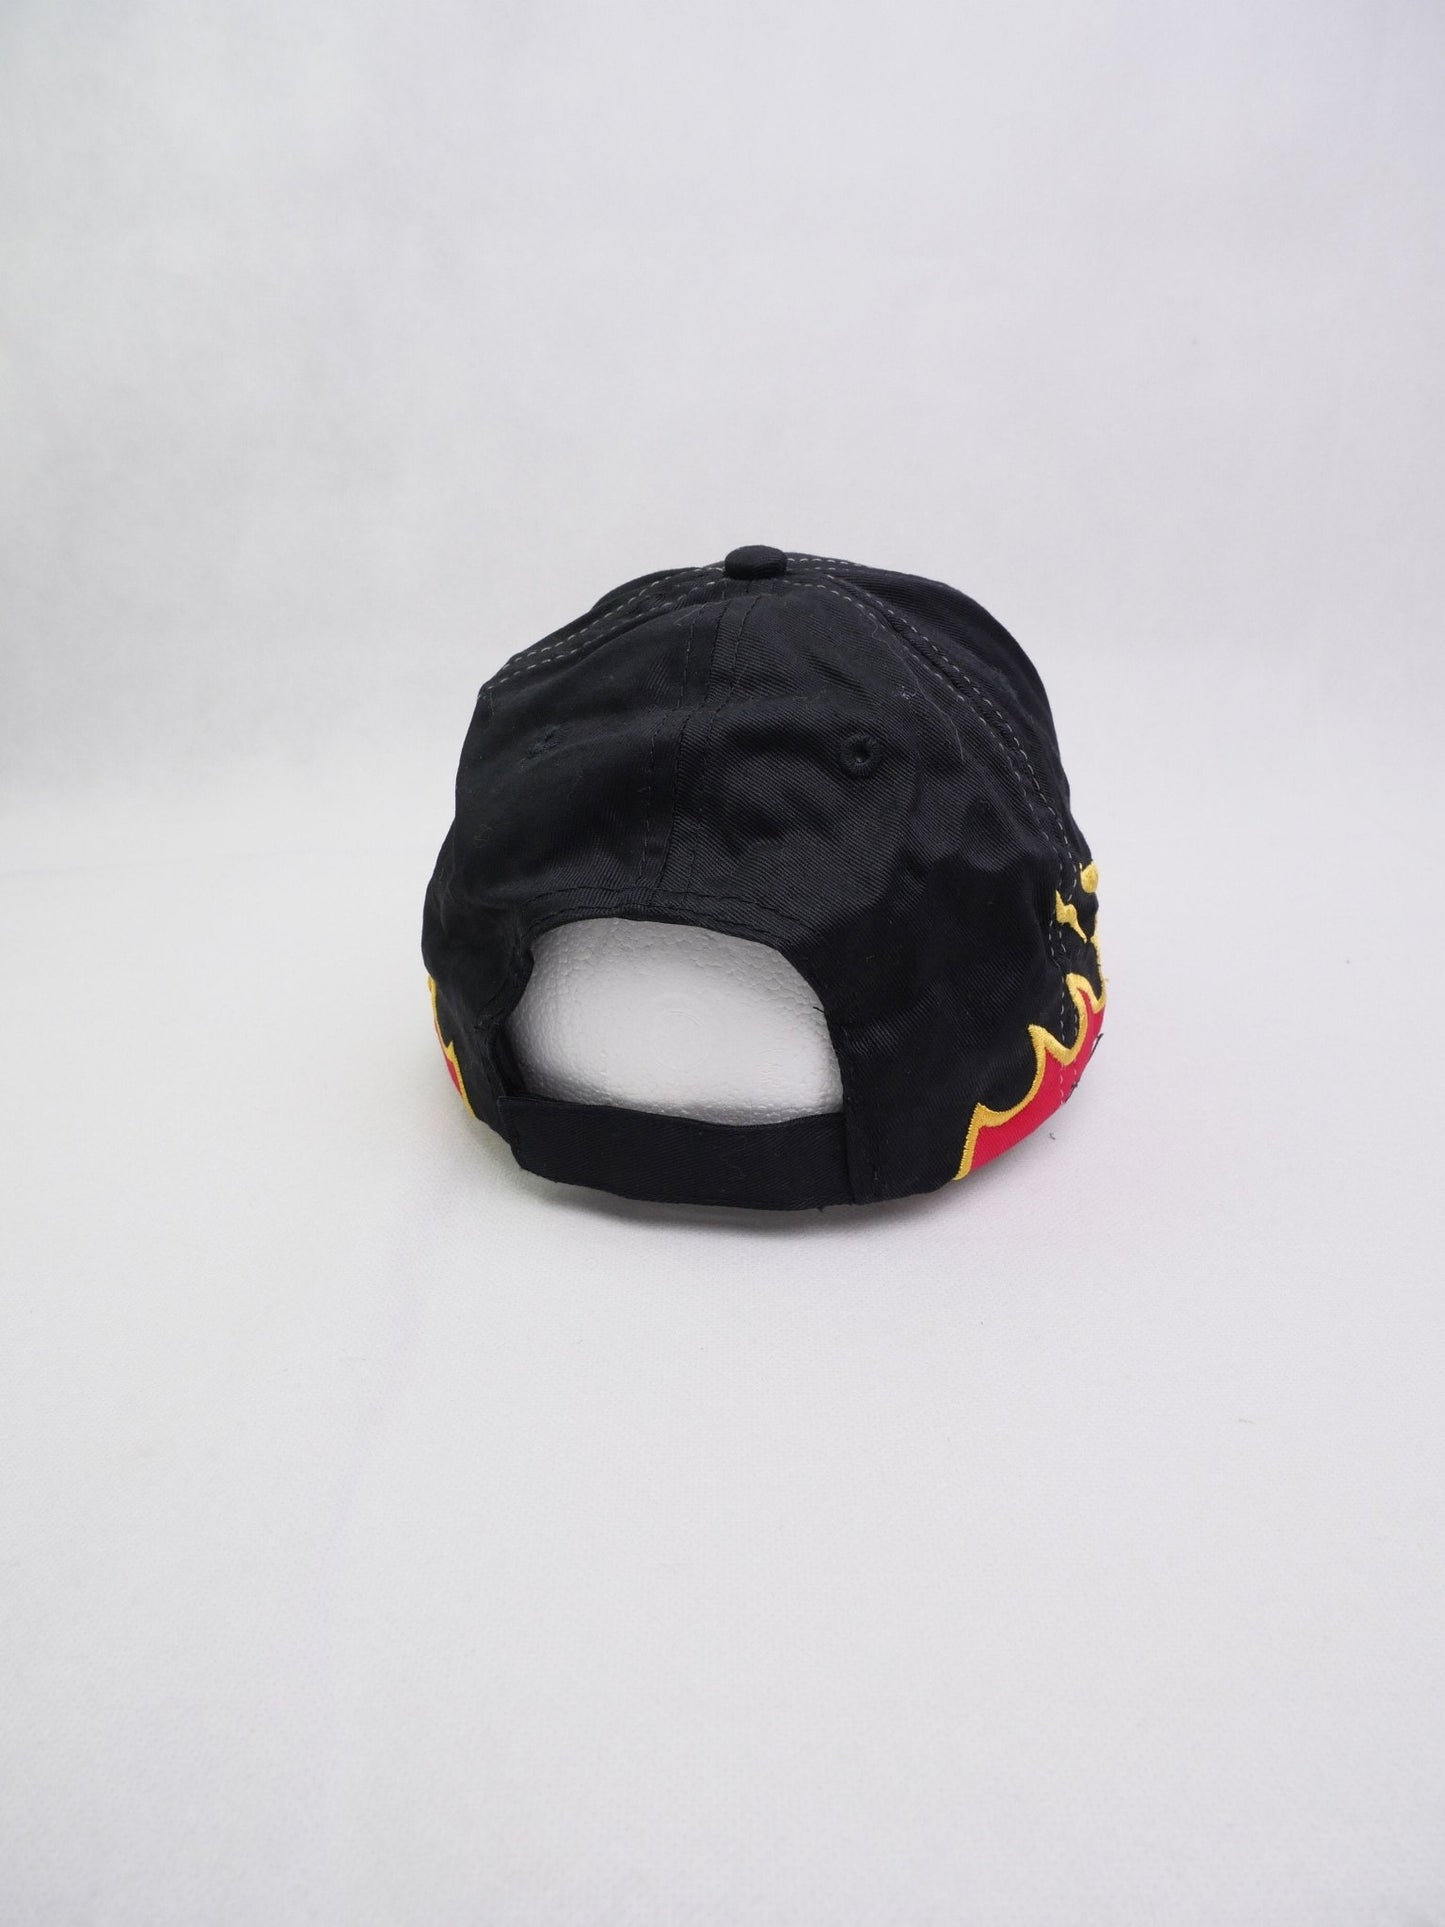 'Fire' embroidered Graphic three toned Cap Accessoire - Peeces